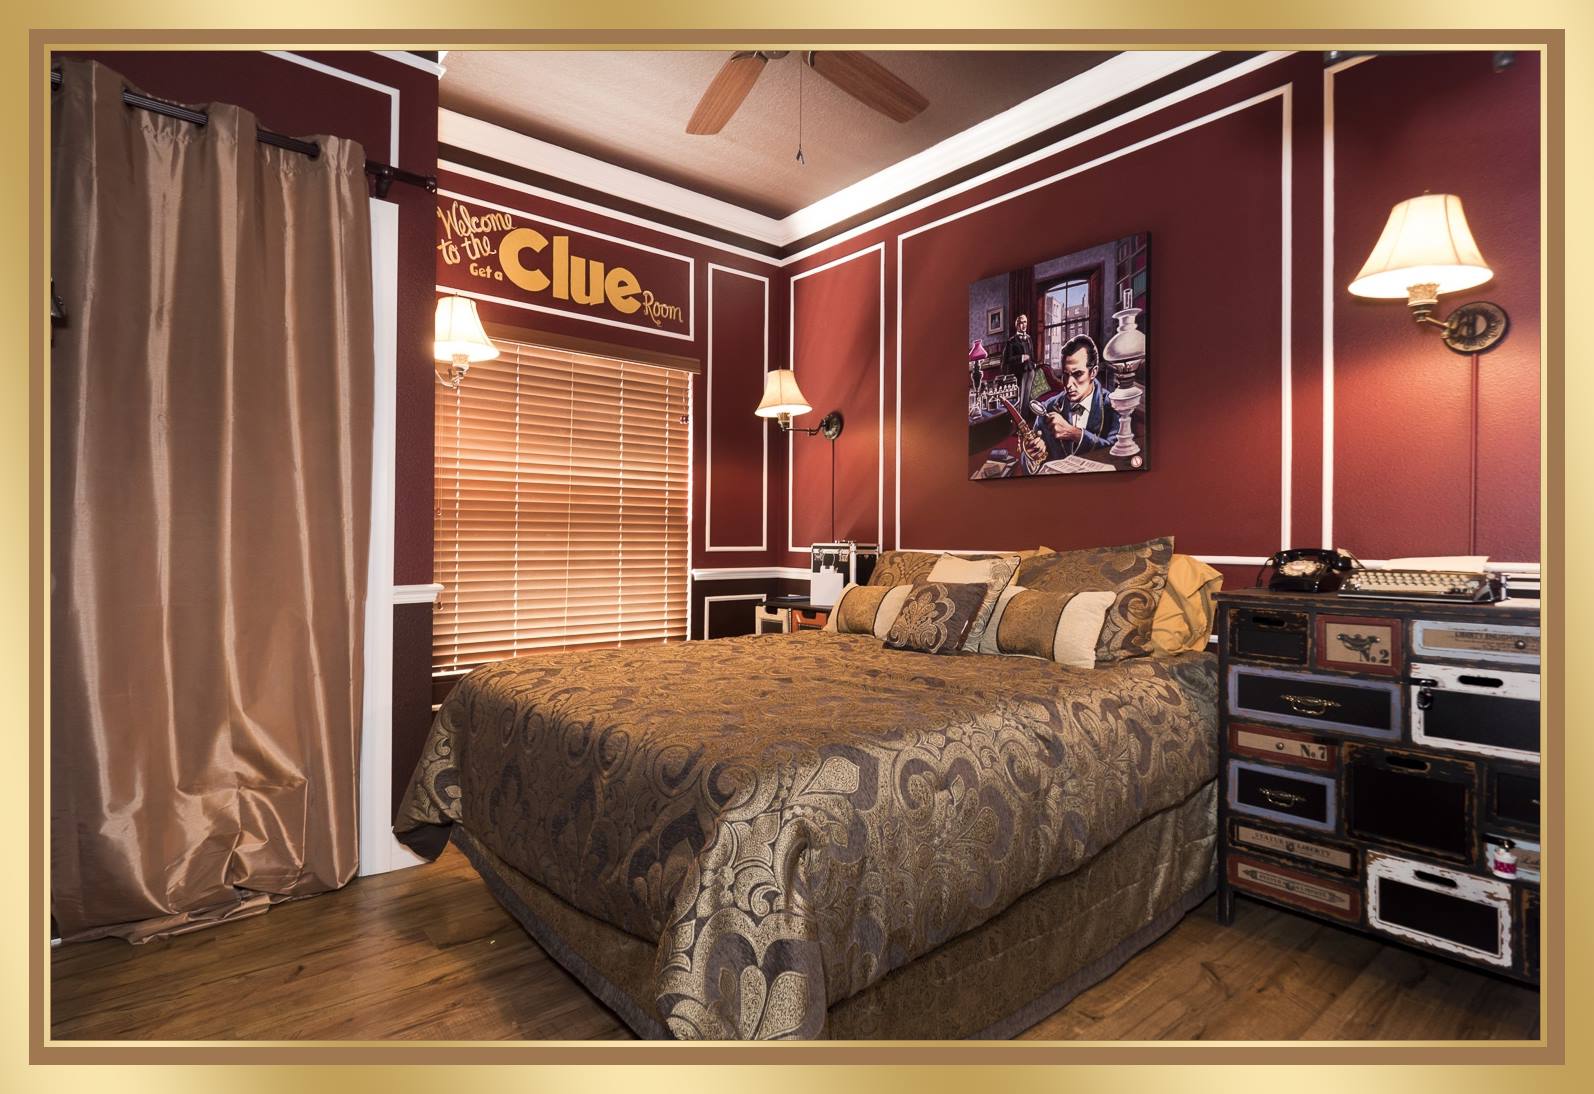 The "Get A CLUE" Escape Room Game & Bedroom at The Great